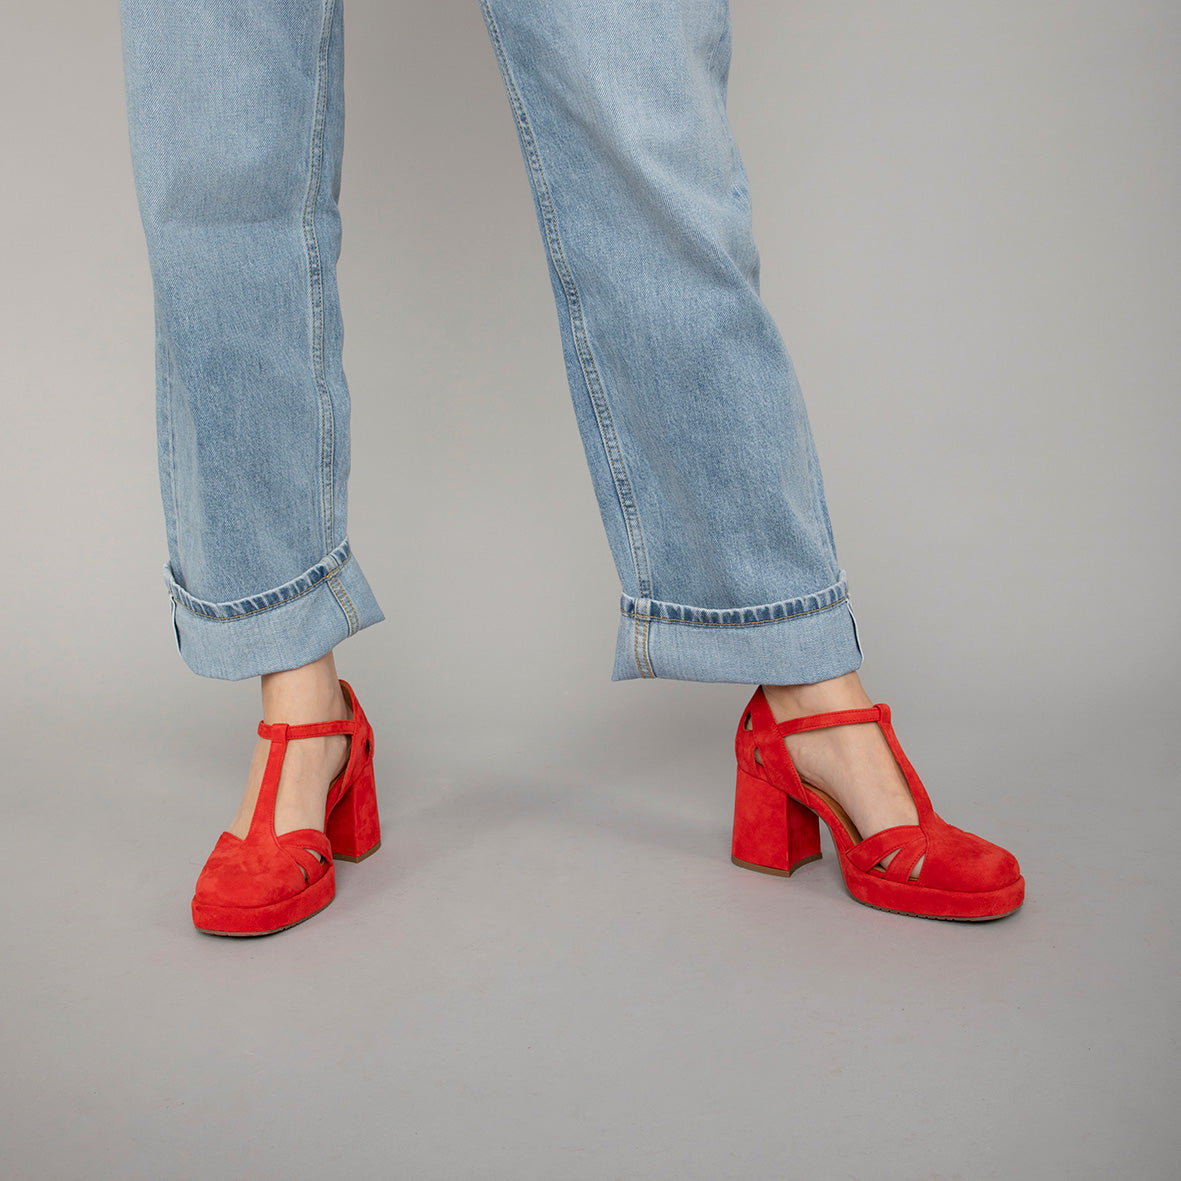 Chaza WIDE Red Suede